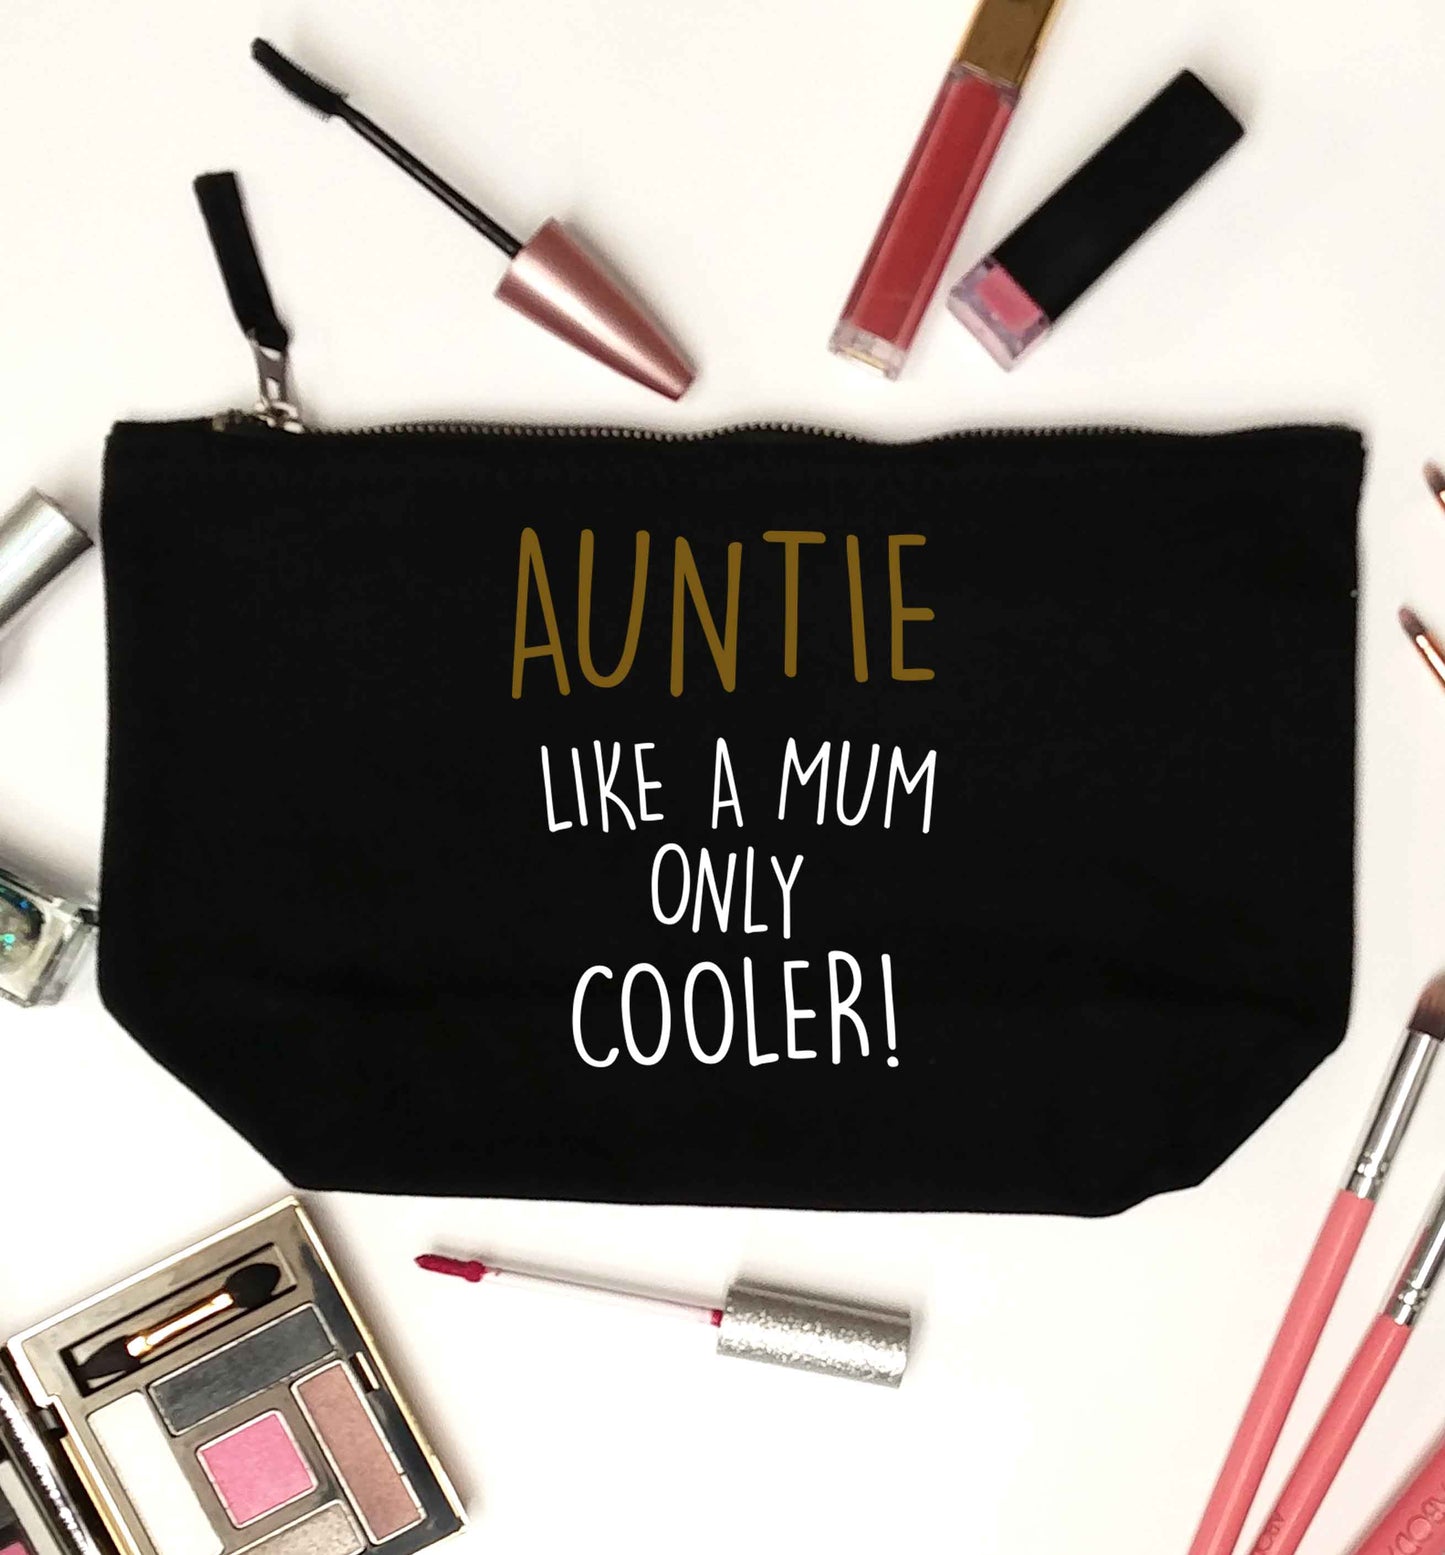 Auntie like a mum only cooler black makeup bag